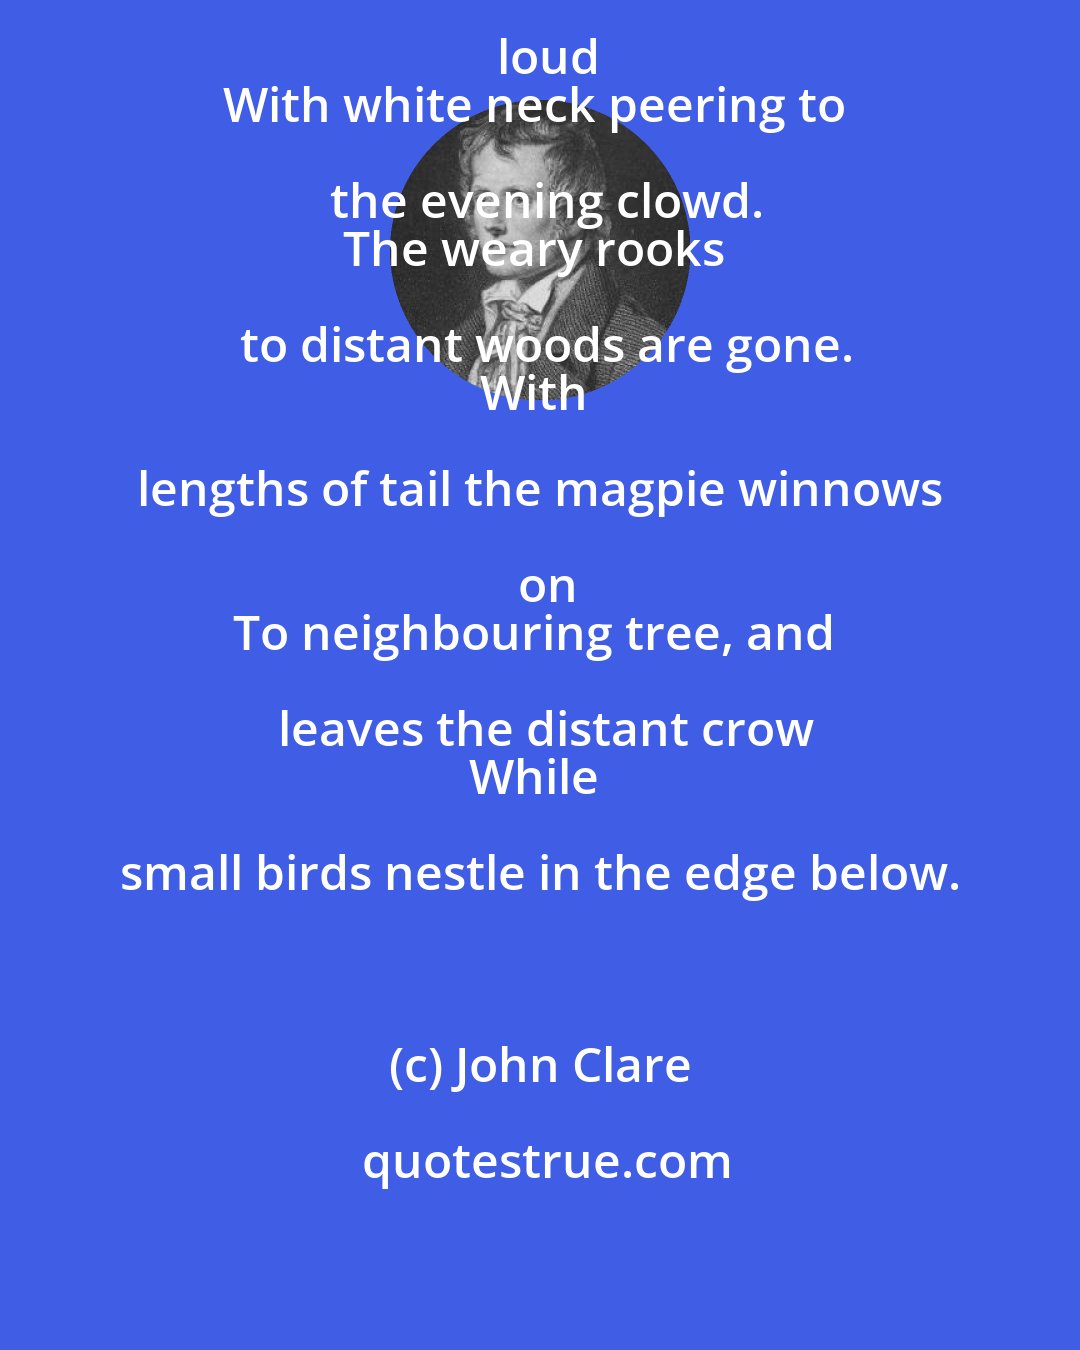 John Clare: The wild swan hurries hight and noises loud
With white neck peering to the evening clowd.
The weary rooks to distant woods are gone.
With lengths of tail the magpie winnows on
To neighbouring tree, and leaves the distant crow
While small birds nestle in the edge below.